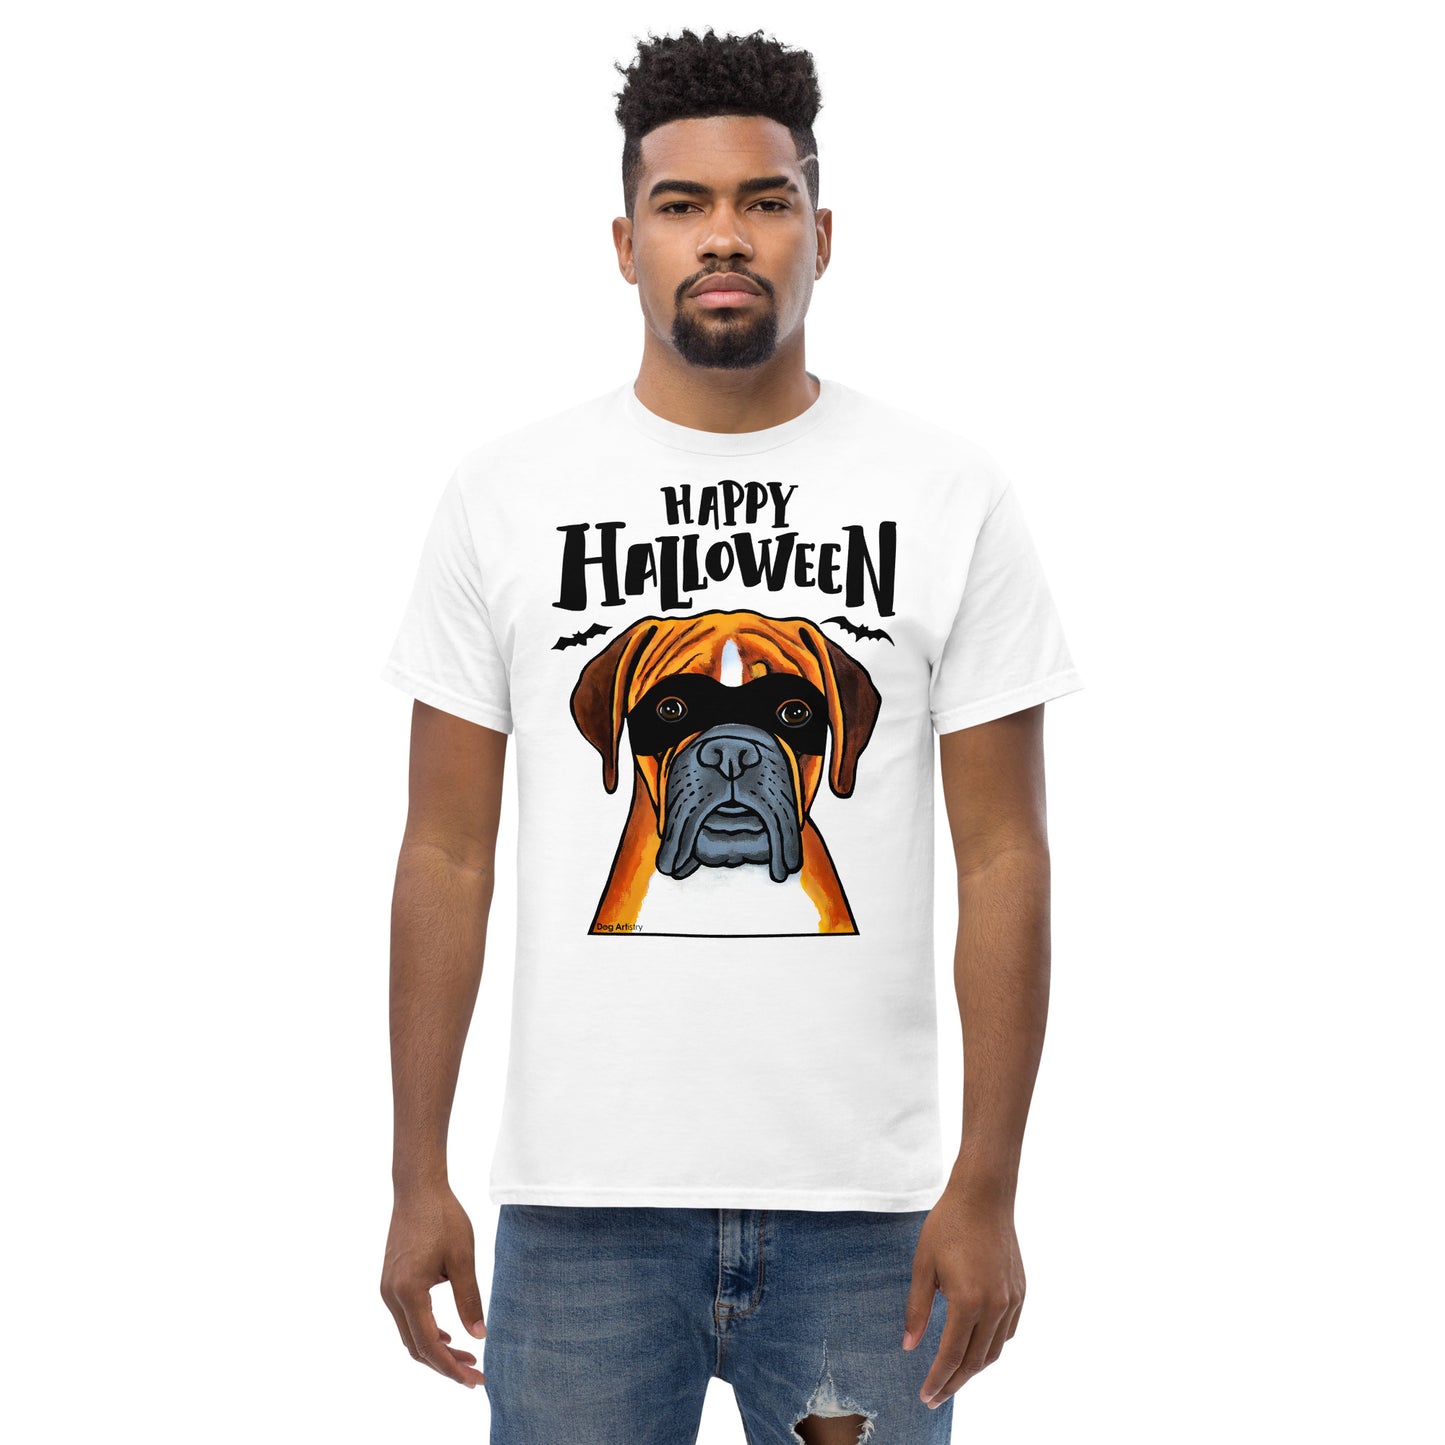 Funny Happy Halloween Boxer wearing mask men’s white t-shirt by Dog Artistry.